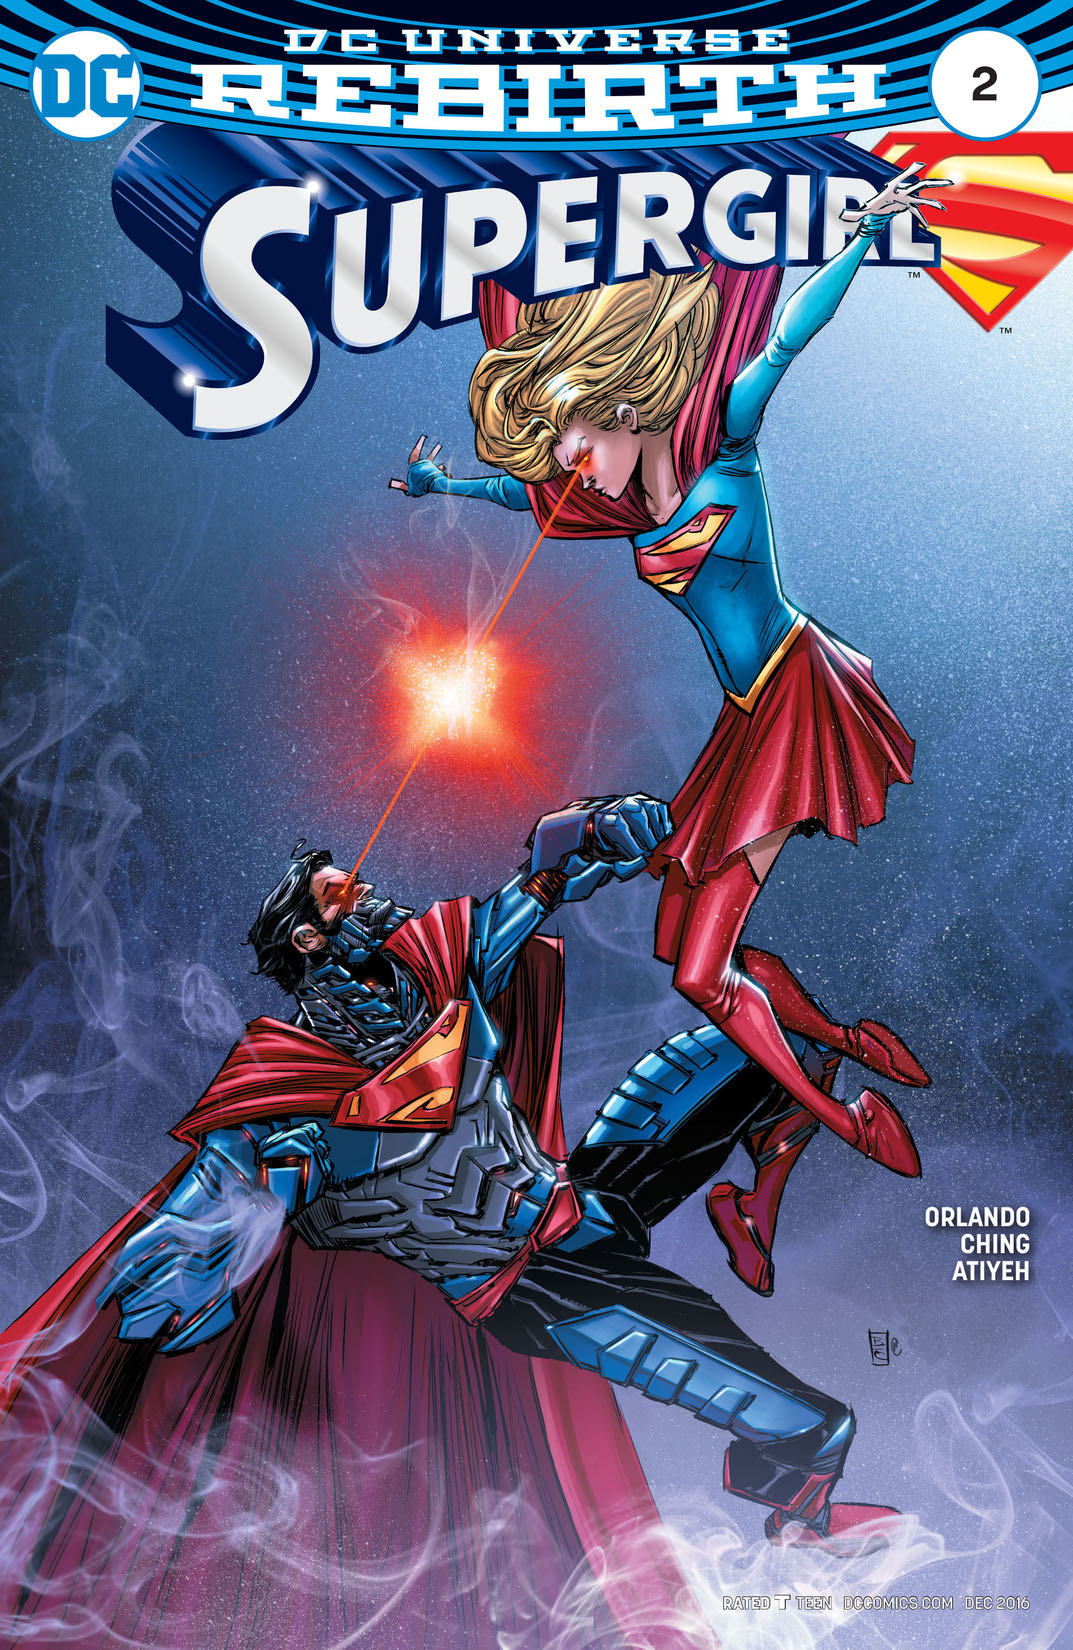 Supergirl (2016-) #2 preview images